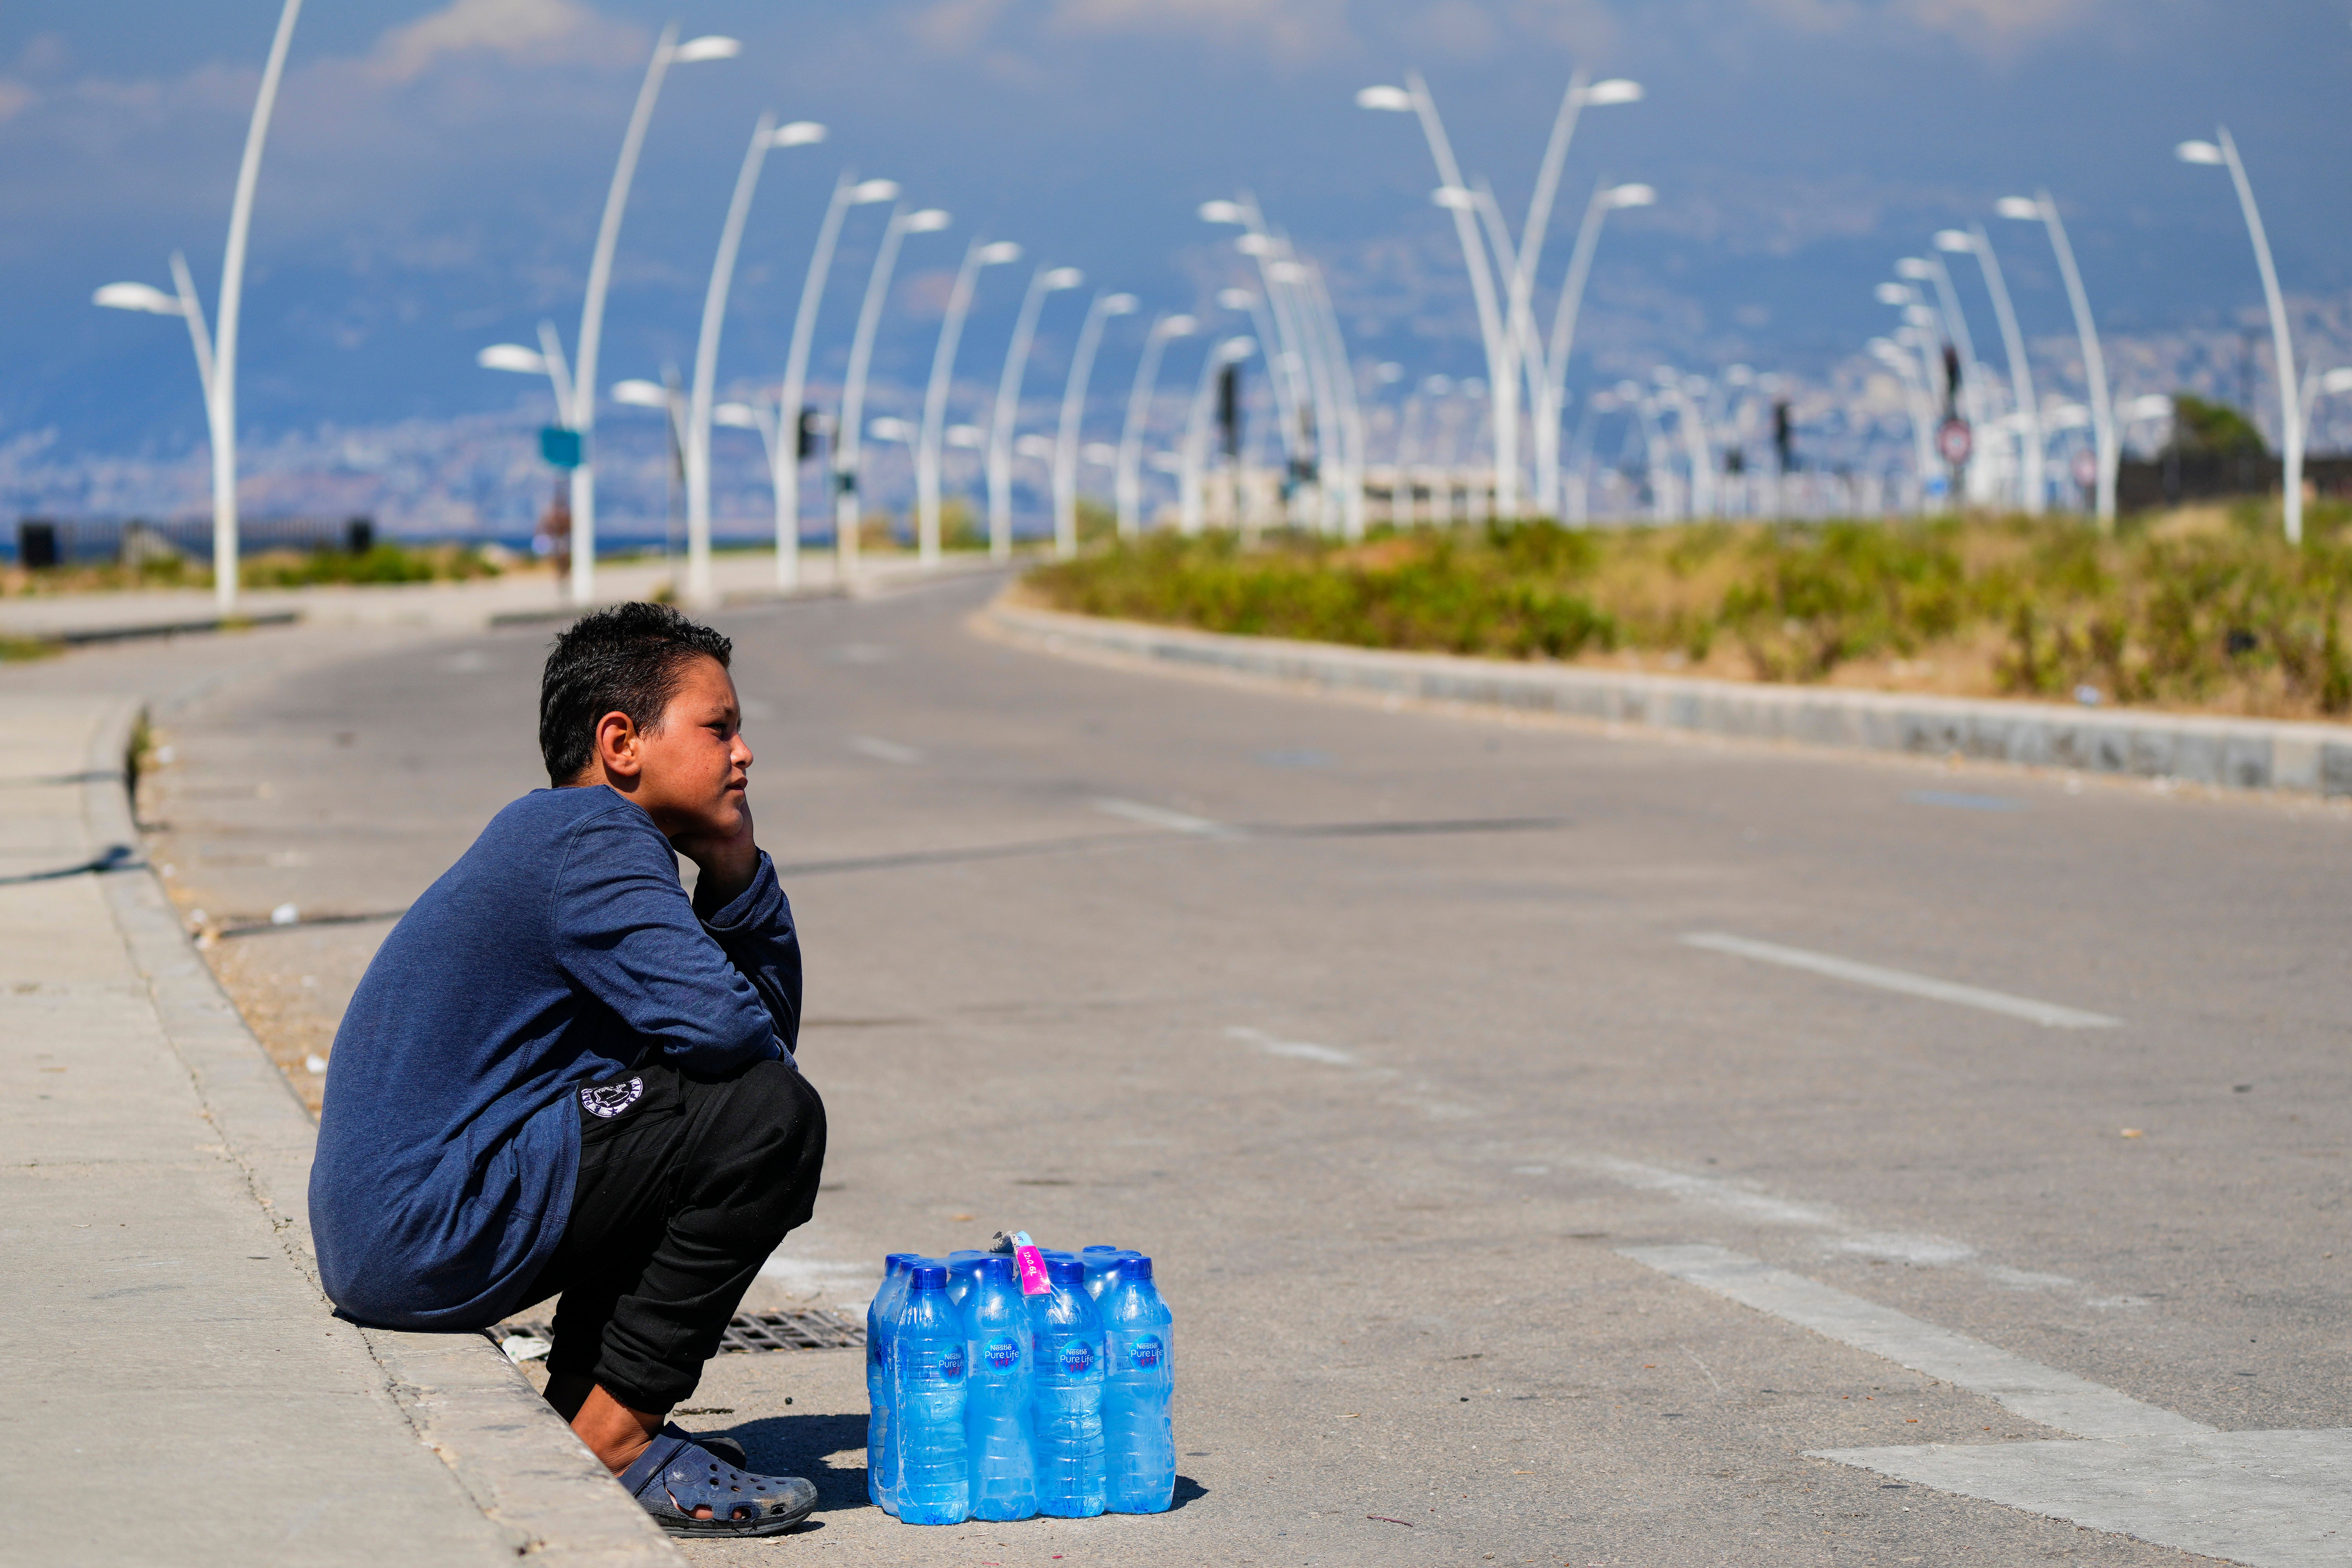 A young boy sits next to a pack of water bottles as he waits for customers during a sweltering day on the Mediterranean Sea corniche in Beirut, Lebanon on July 20, 2023